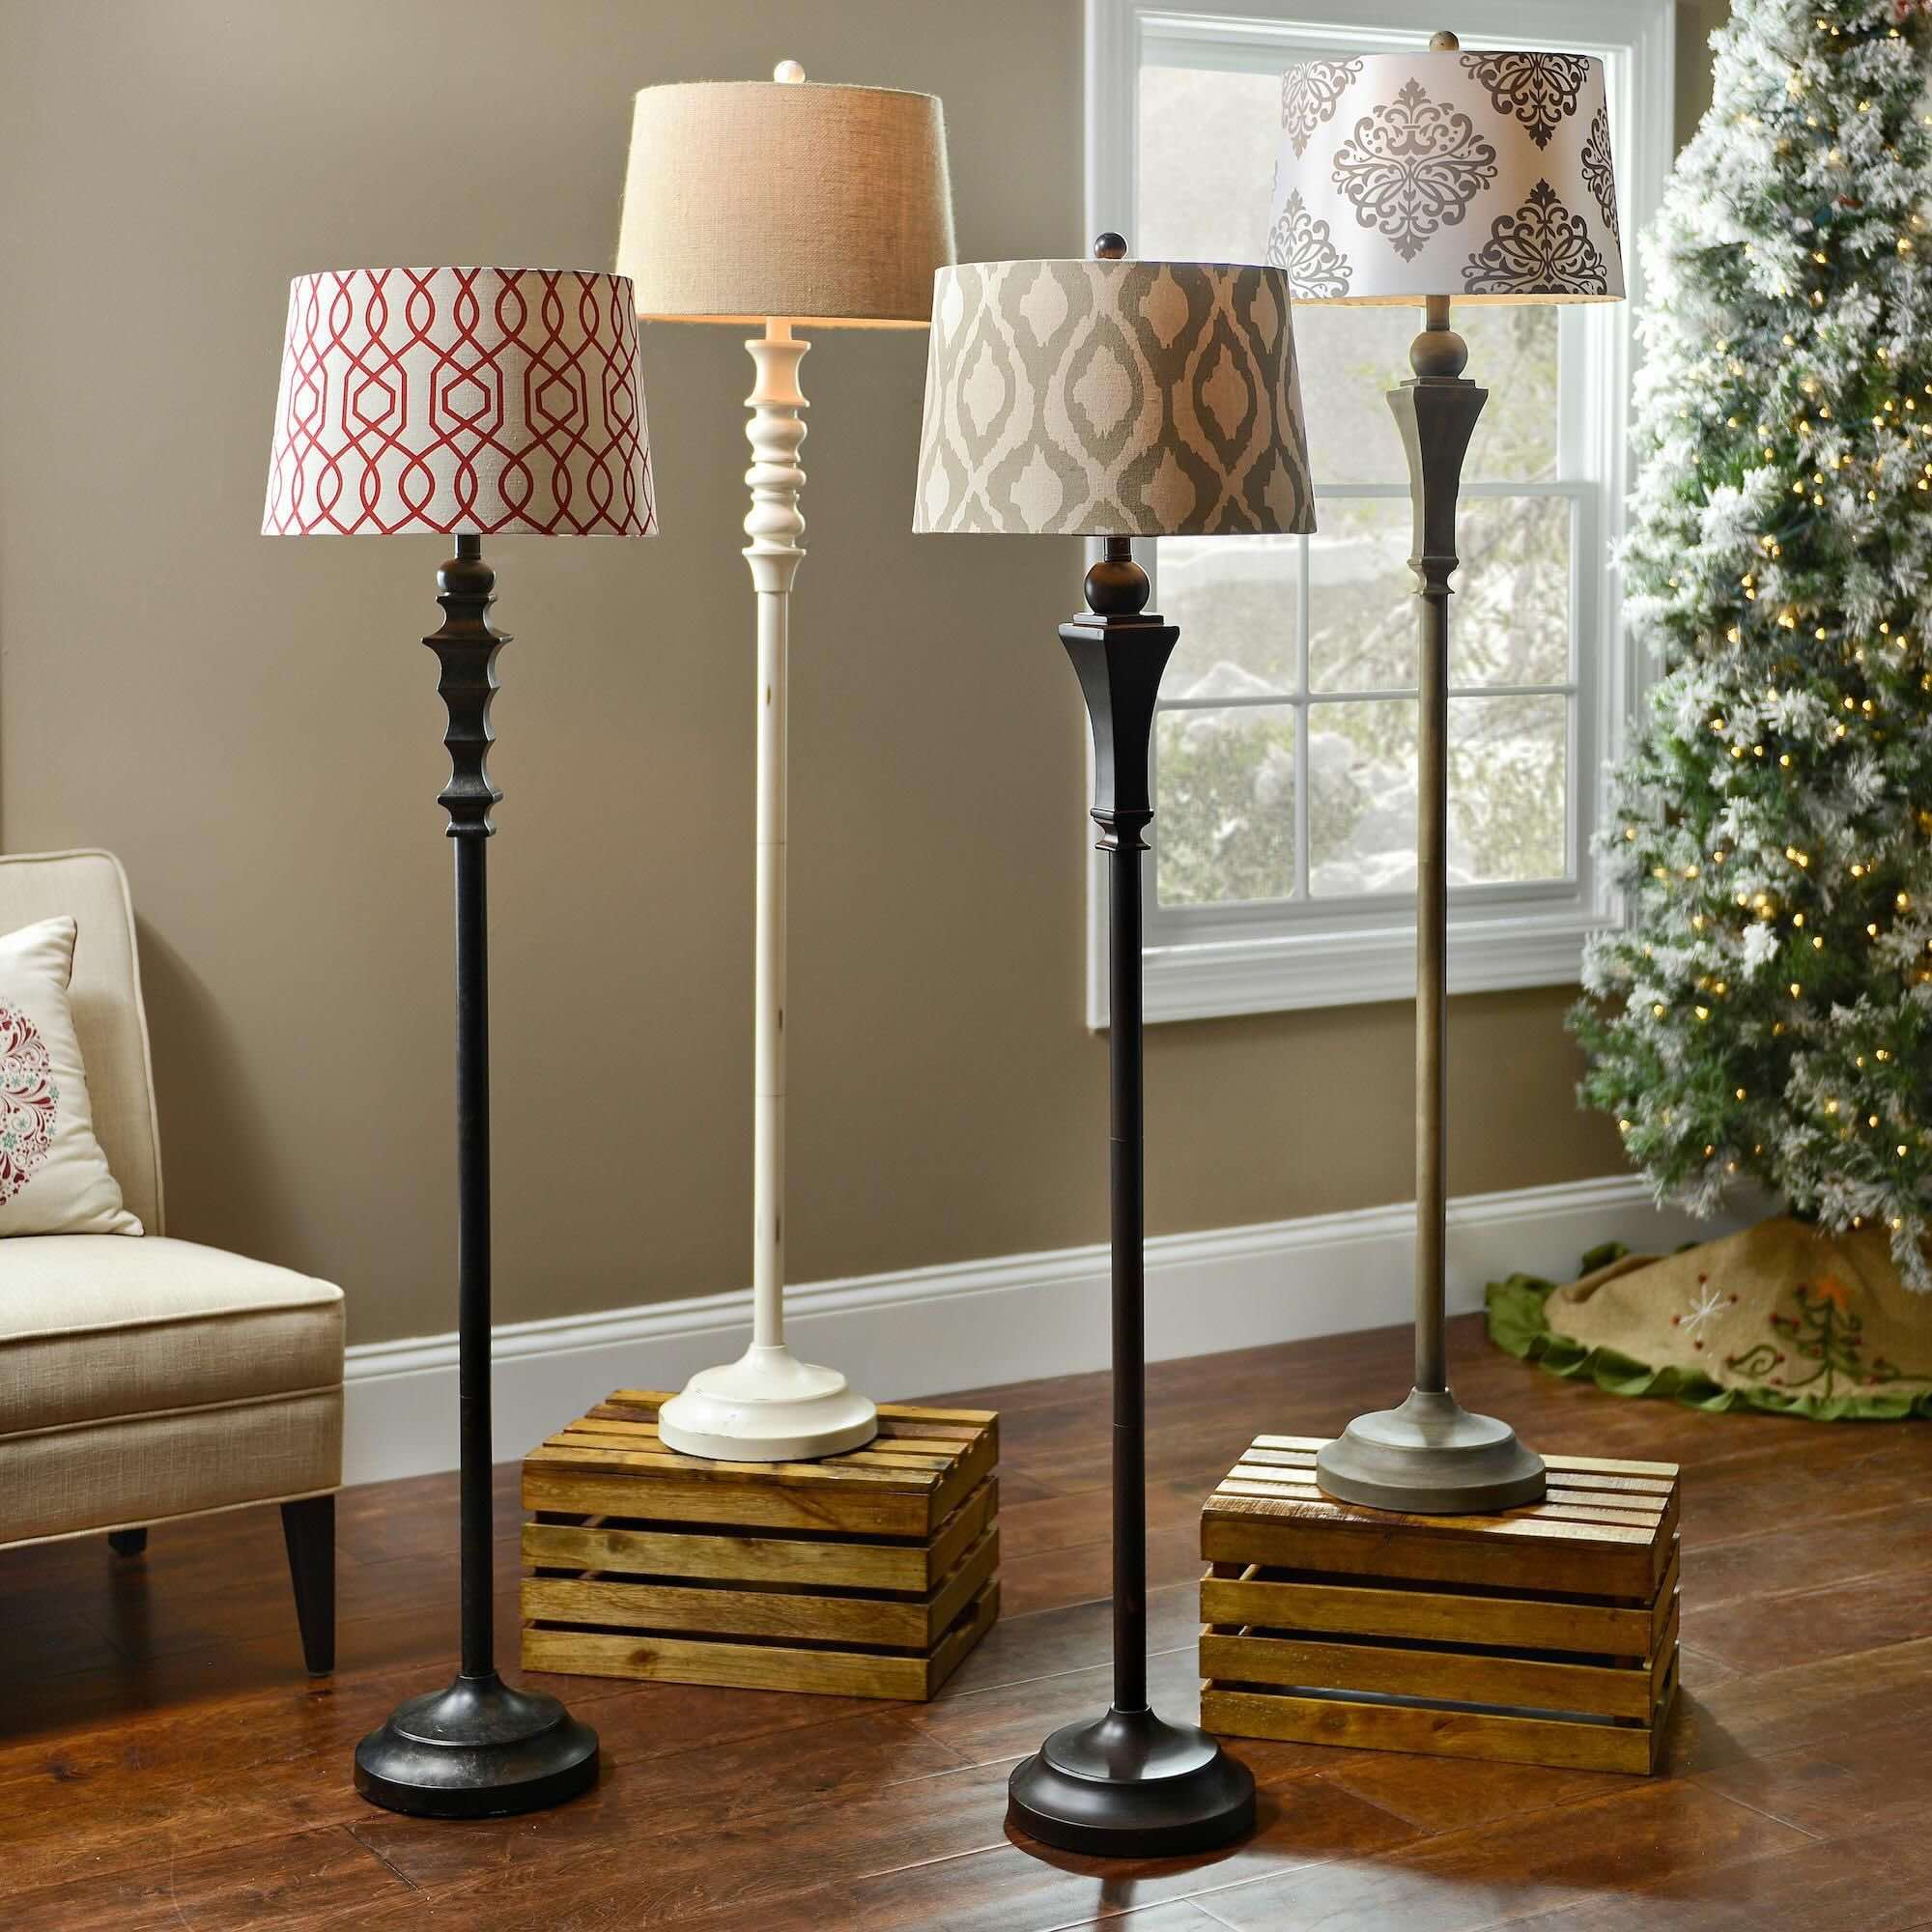 How To Make A Floor Lamp